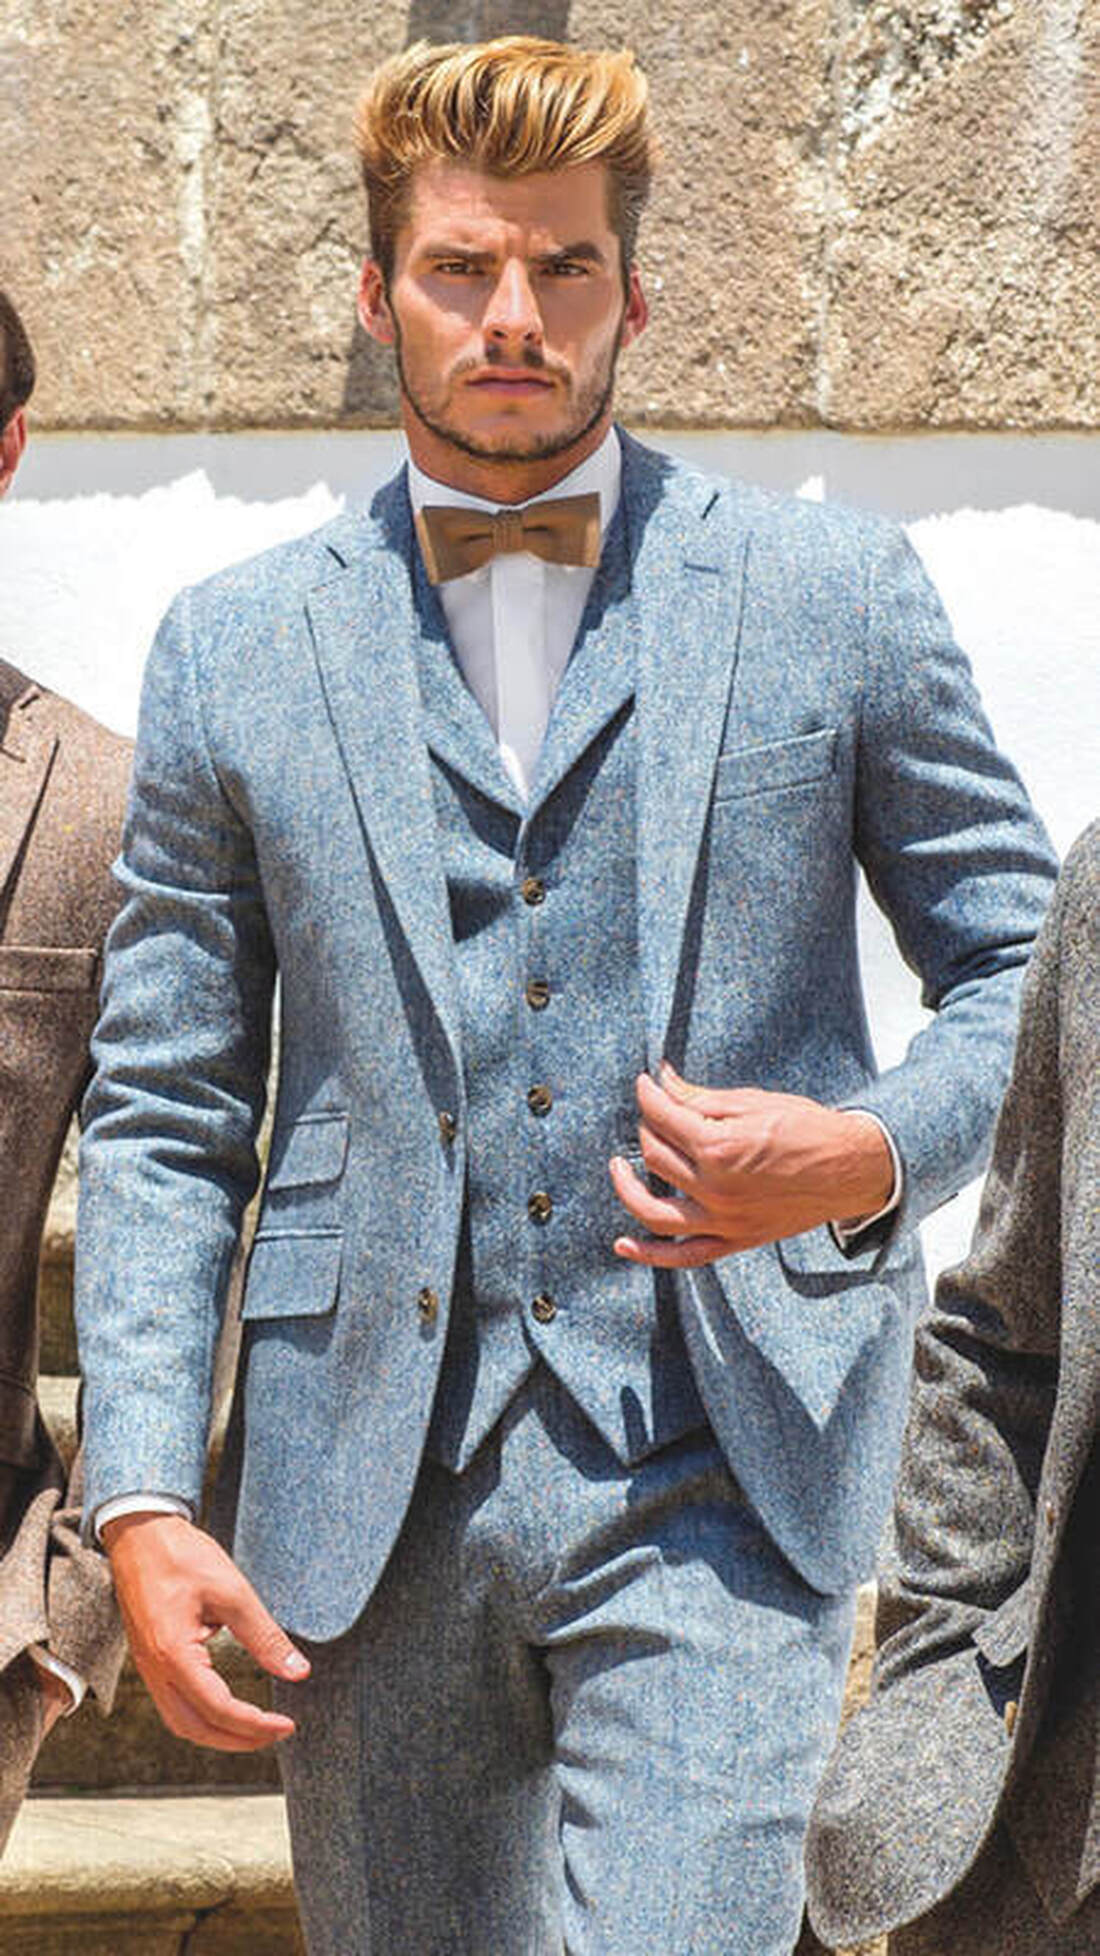 POWDER BLUE DONEGAL TWEED ​SUIT HIRE - PARKERS FORMAL WEAR